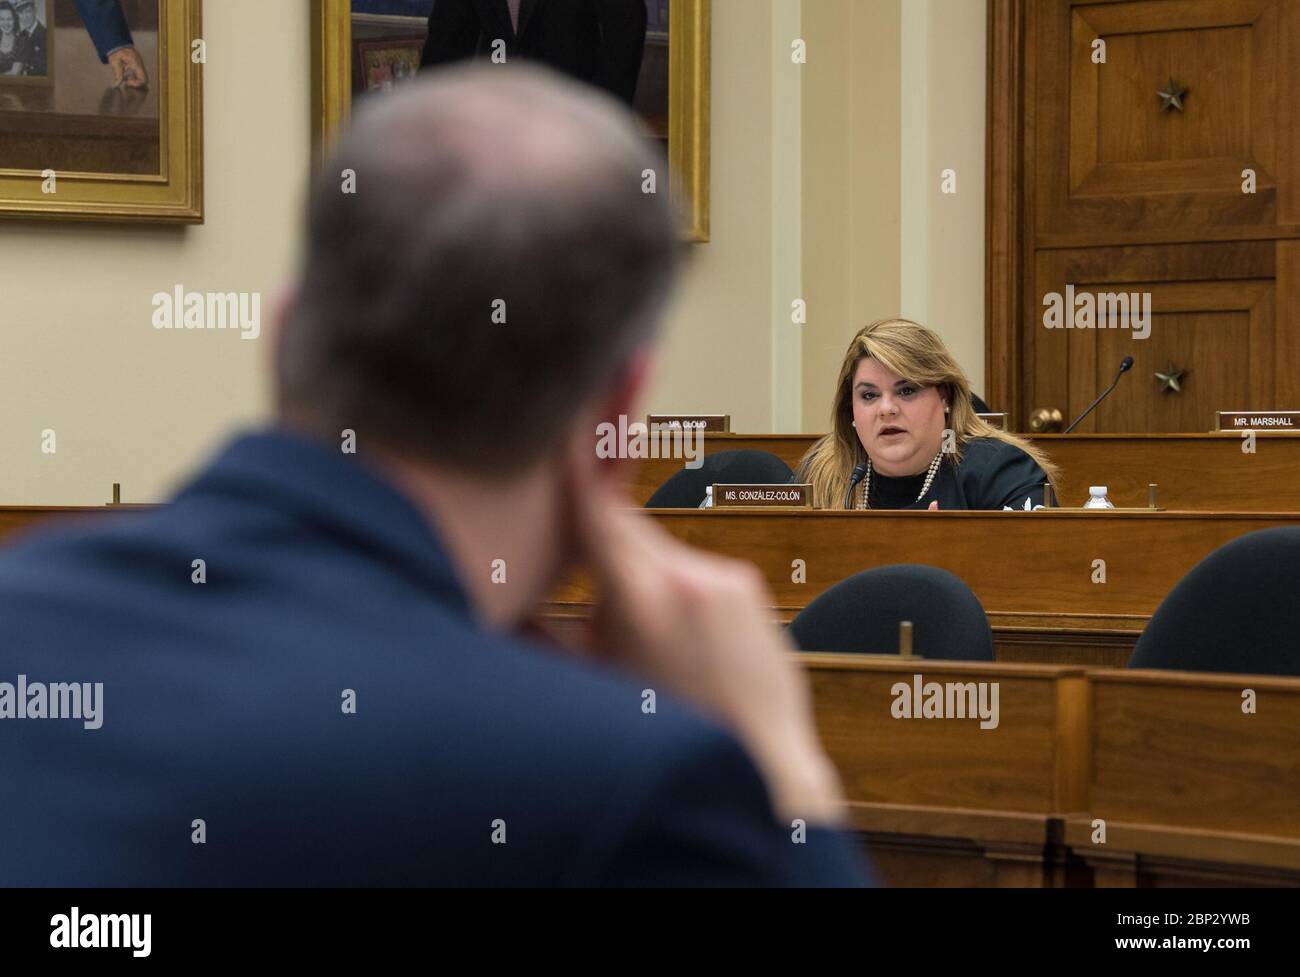 House NASA FY 20' Budget Hearing  Resident Commissioner Jenniffer González-Colón, R-Puerto Rico, asks NASA Administrator Jim Bridenstine a question during a House Committee on Science, Space, and Technology hearing to review the Fiscal Year 2020 budget request for the National Aeronautics and Space Administration, Tuesday, April 2, 2019 at the Rayburn House Office Building in Washington. Stock Photo